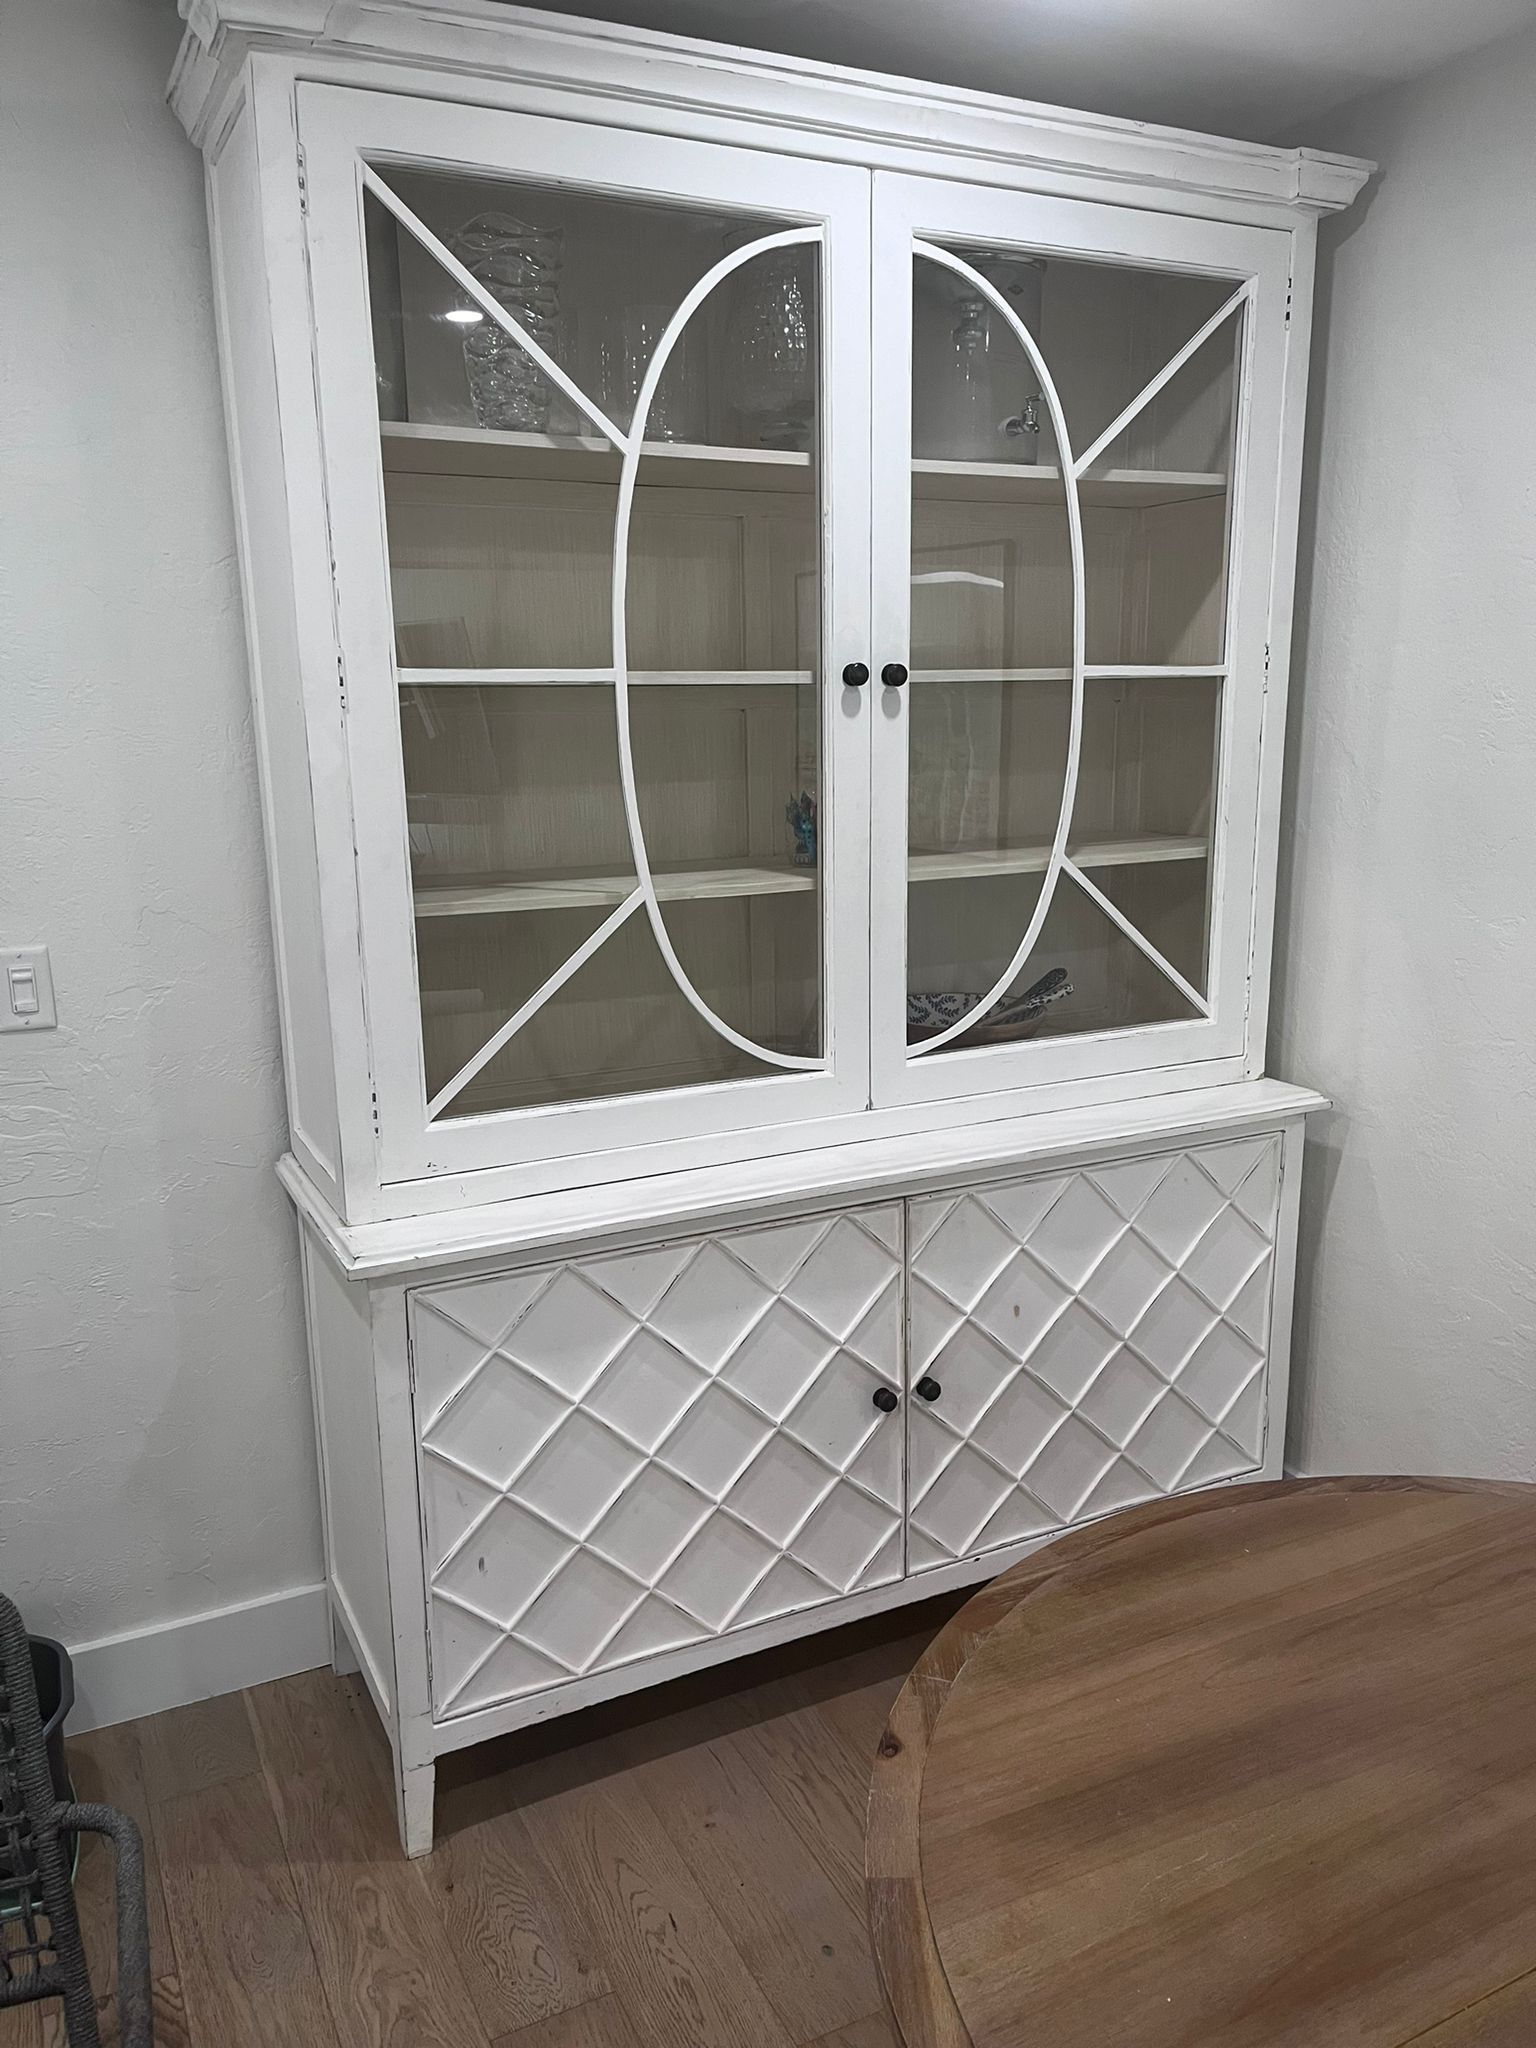 2-Piece Cabinet with Glass and Shelves - White